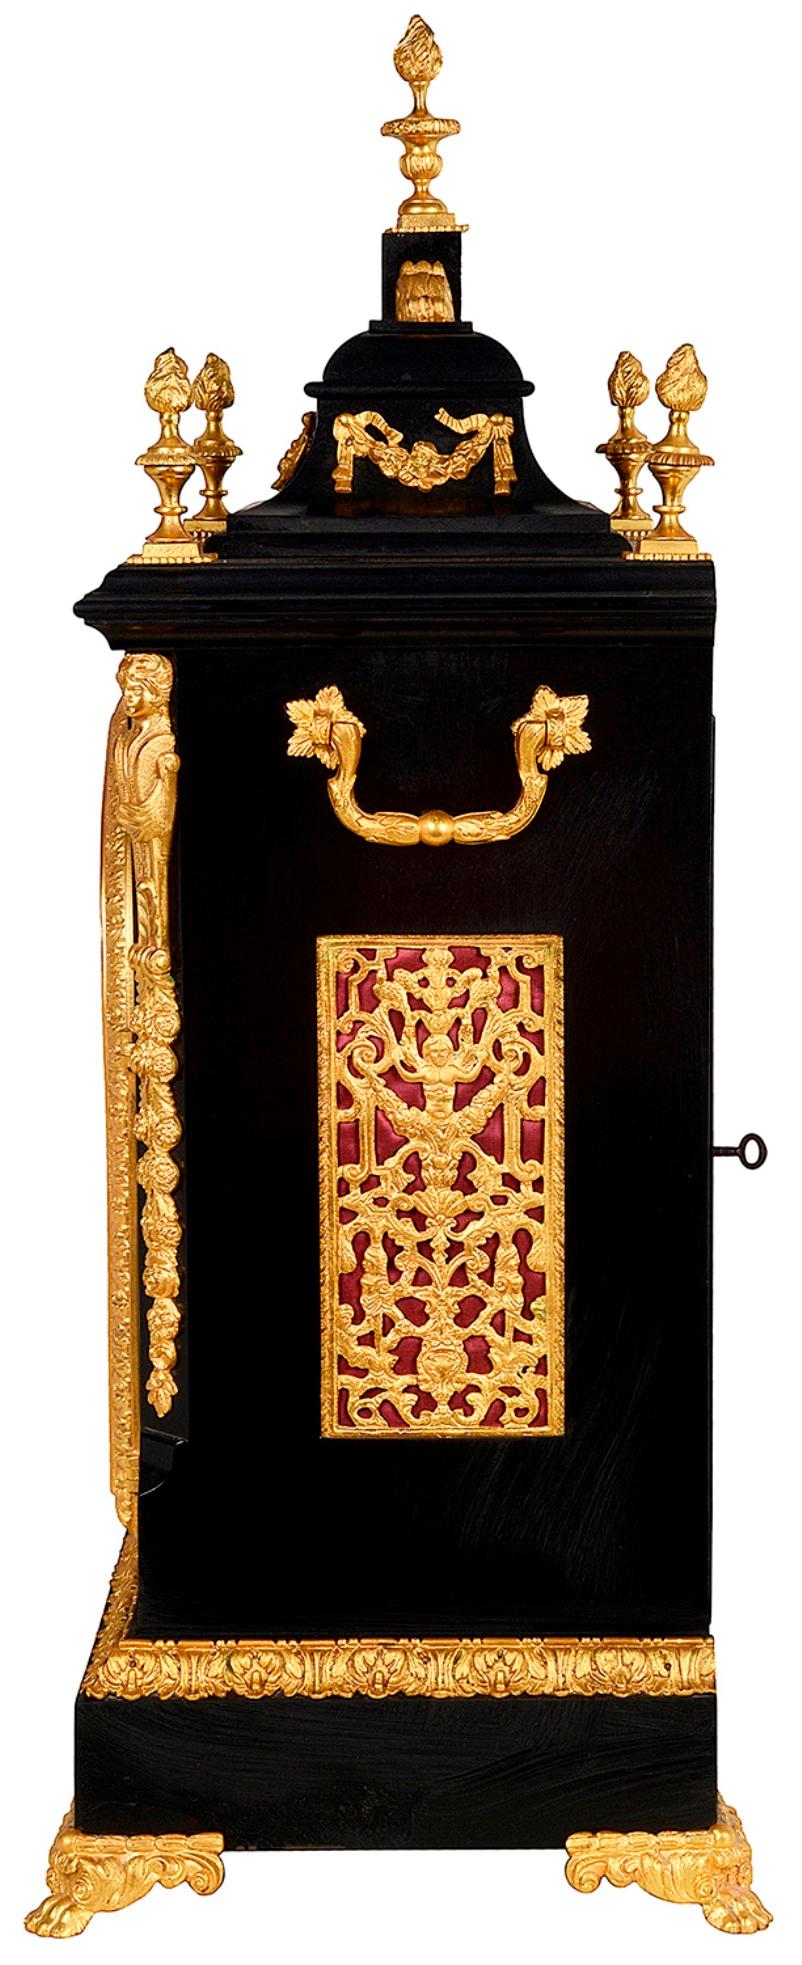 19th Century English, Westminster Chiming Mantel Clock 5